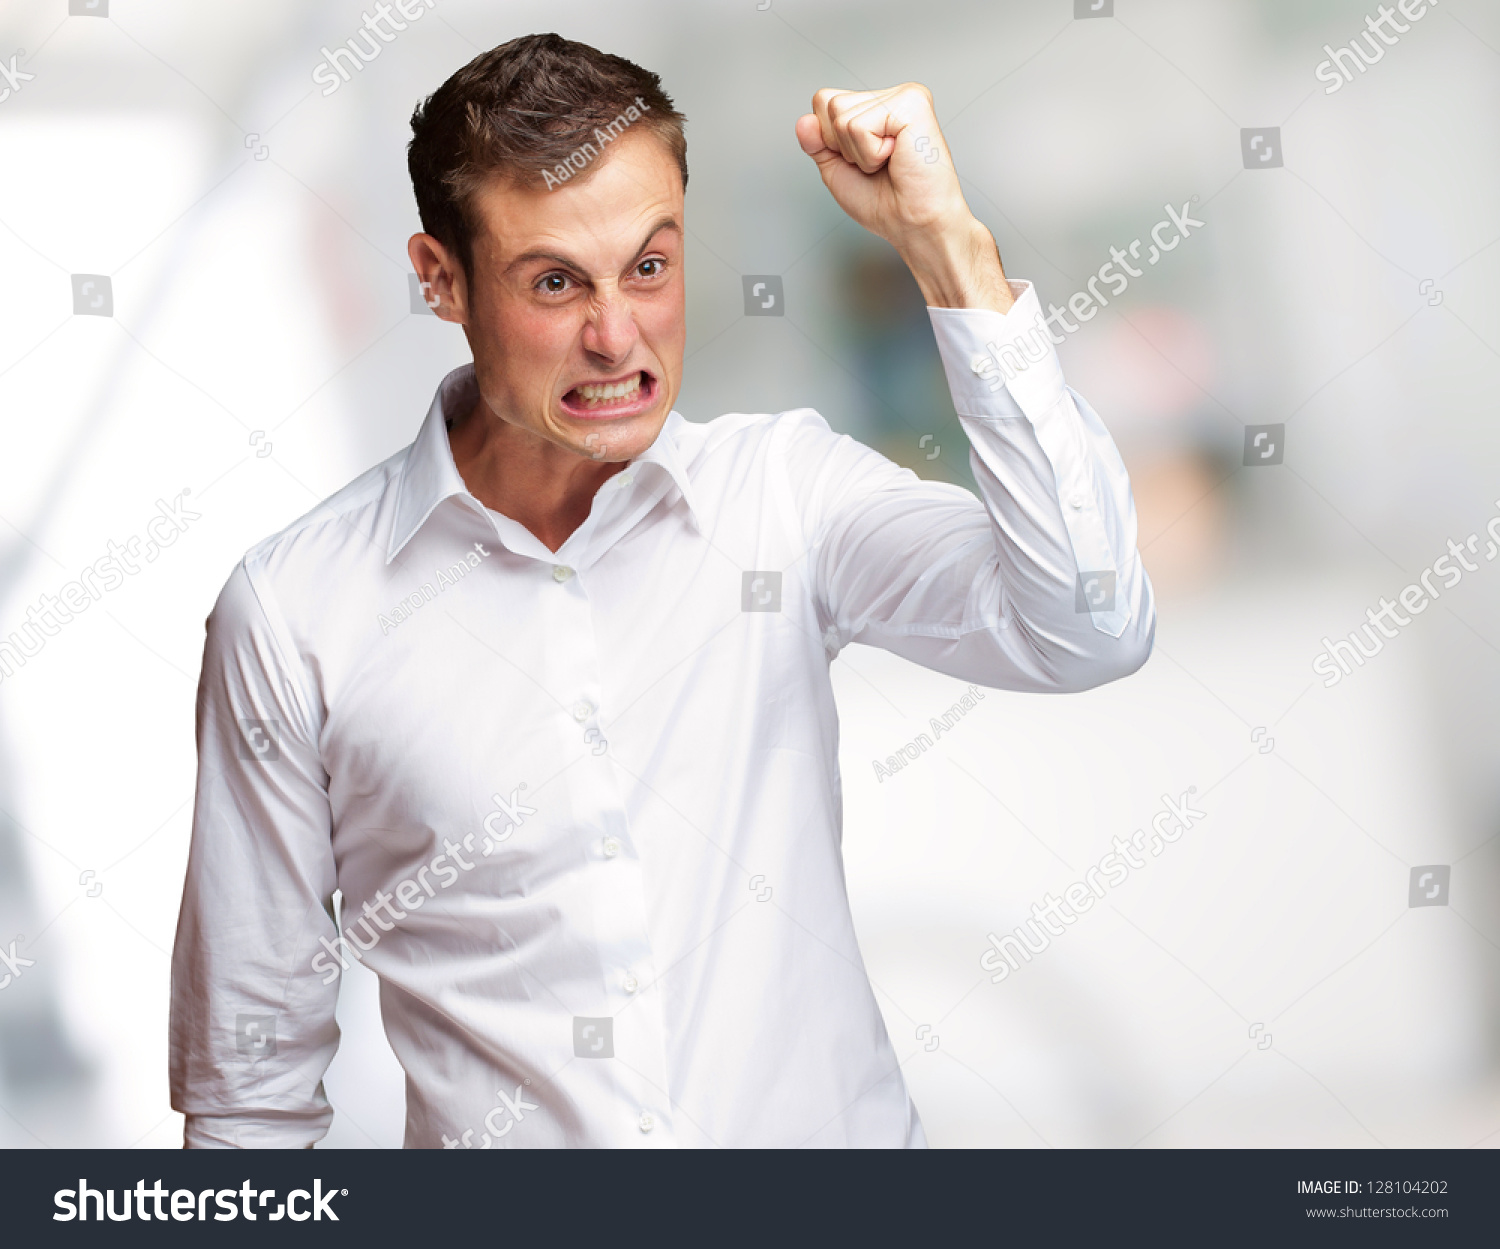 Portrait Angry Young Man Clenching His Stock Photo Edit Now 128104202